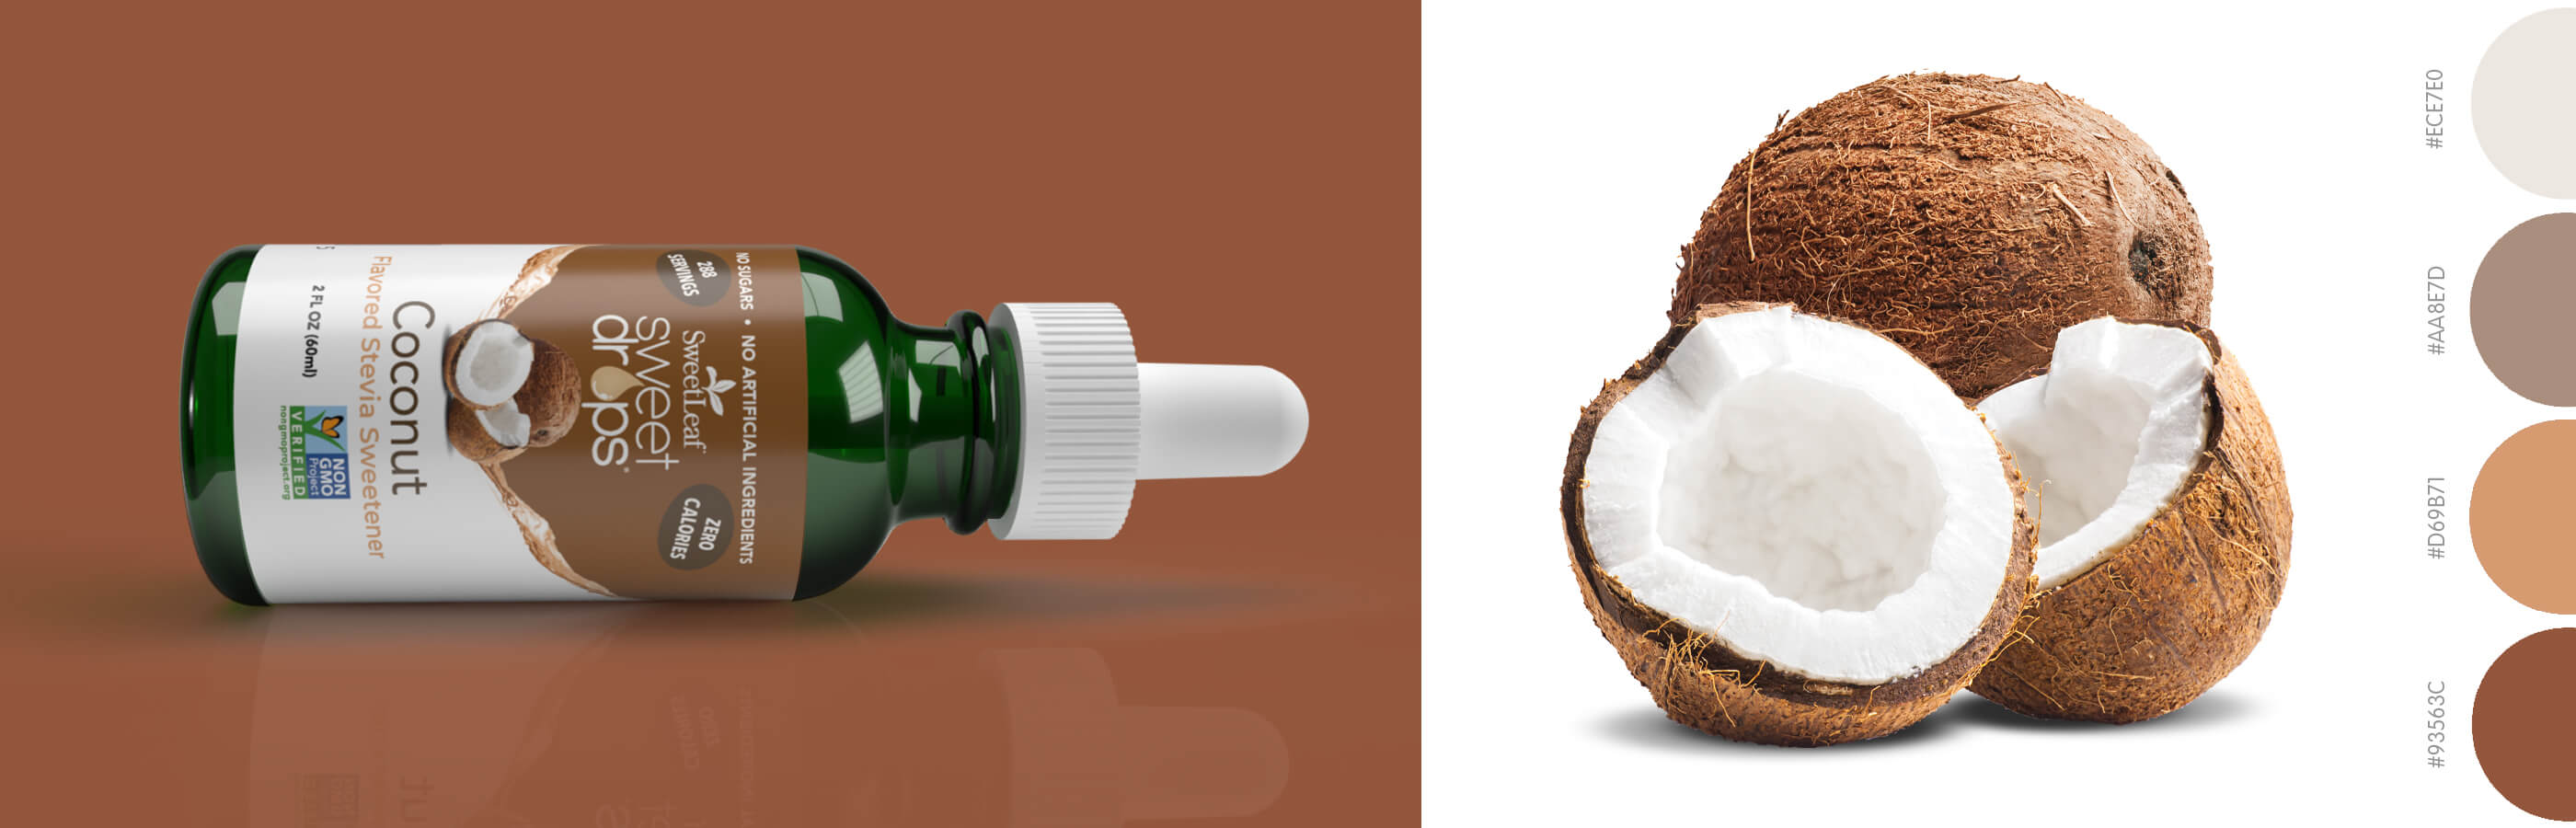 sweet drops coconut package design image